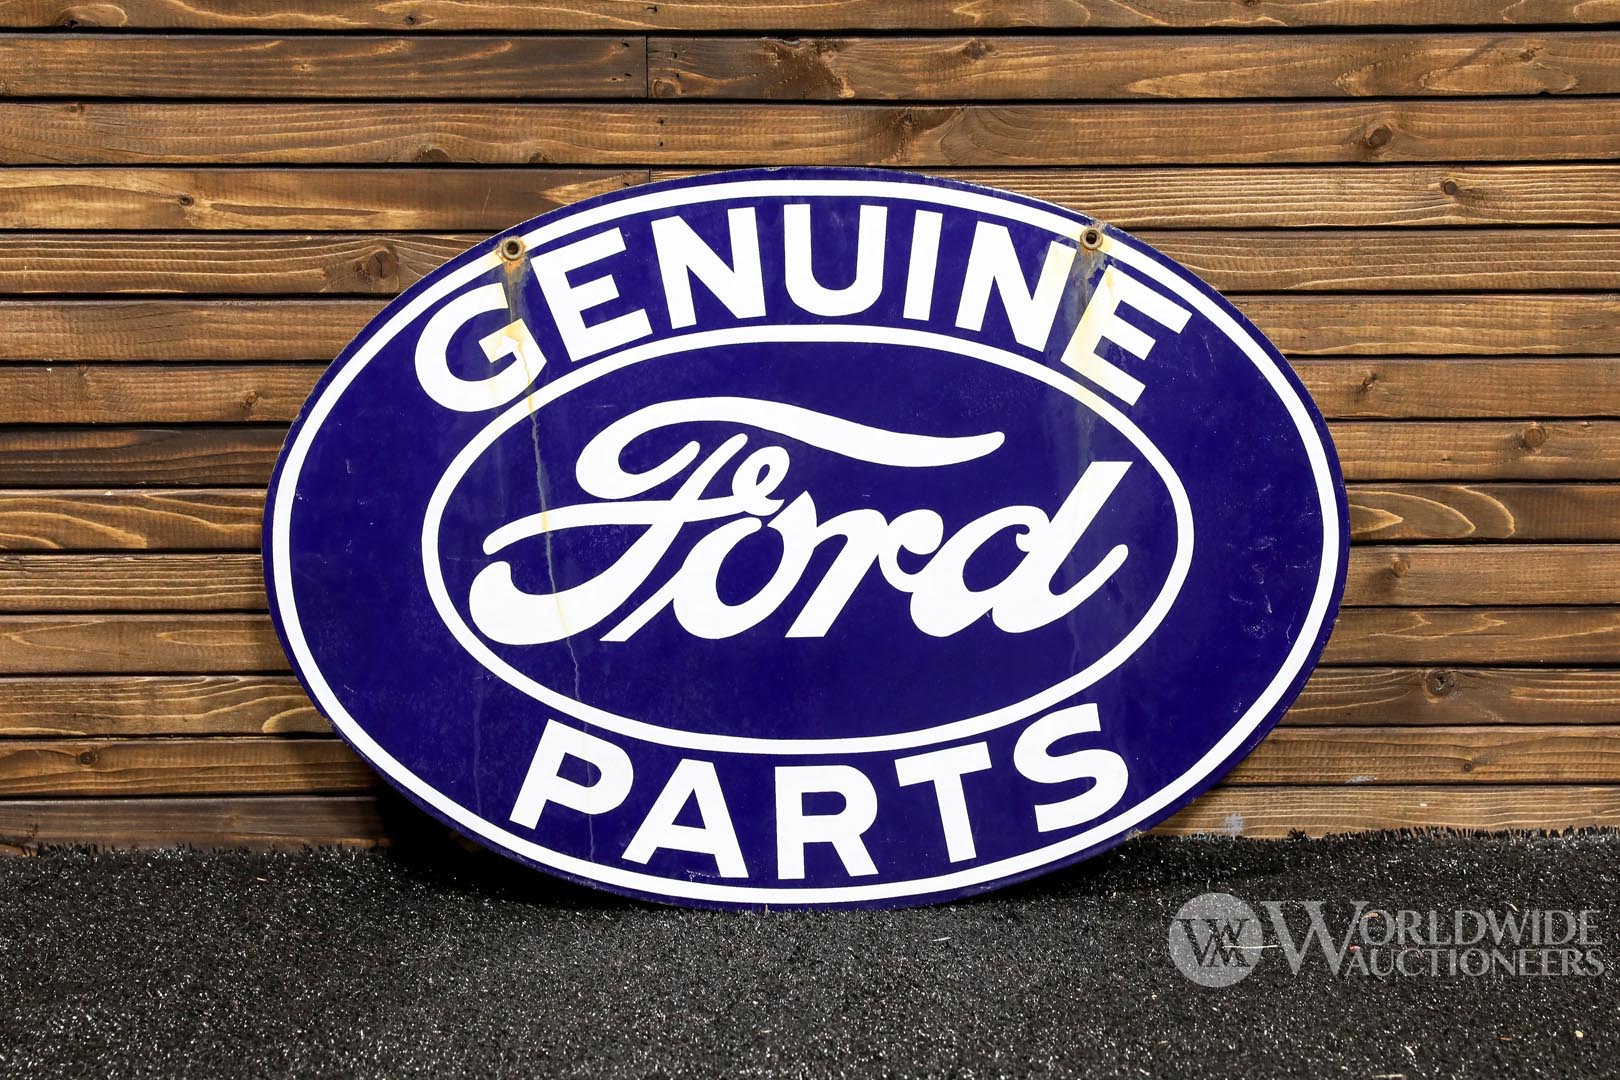 1930s Ford Genuine Parts Double-Sided Porcelain Sign